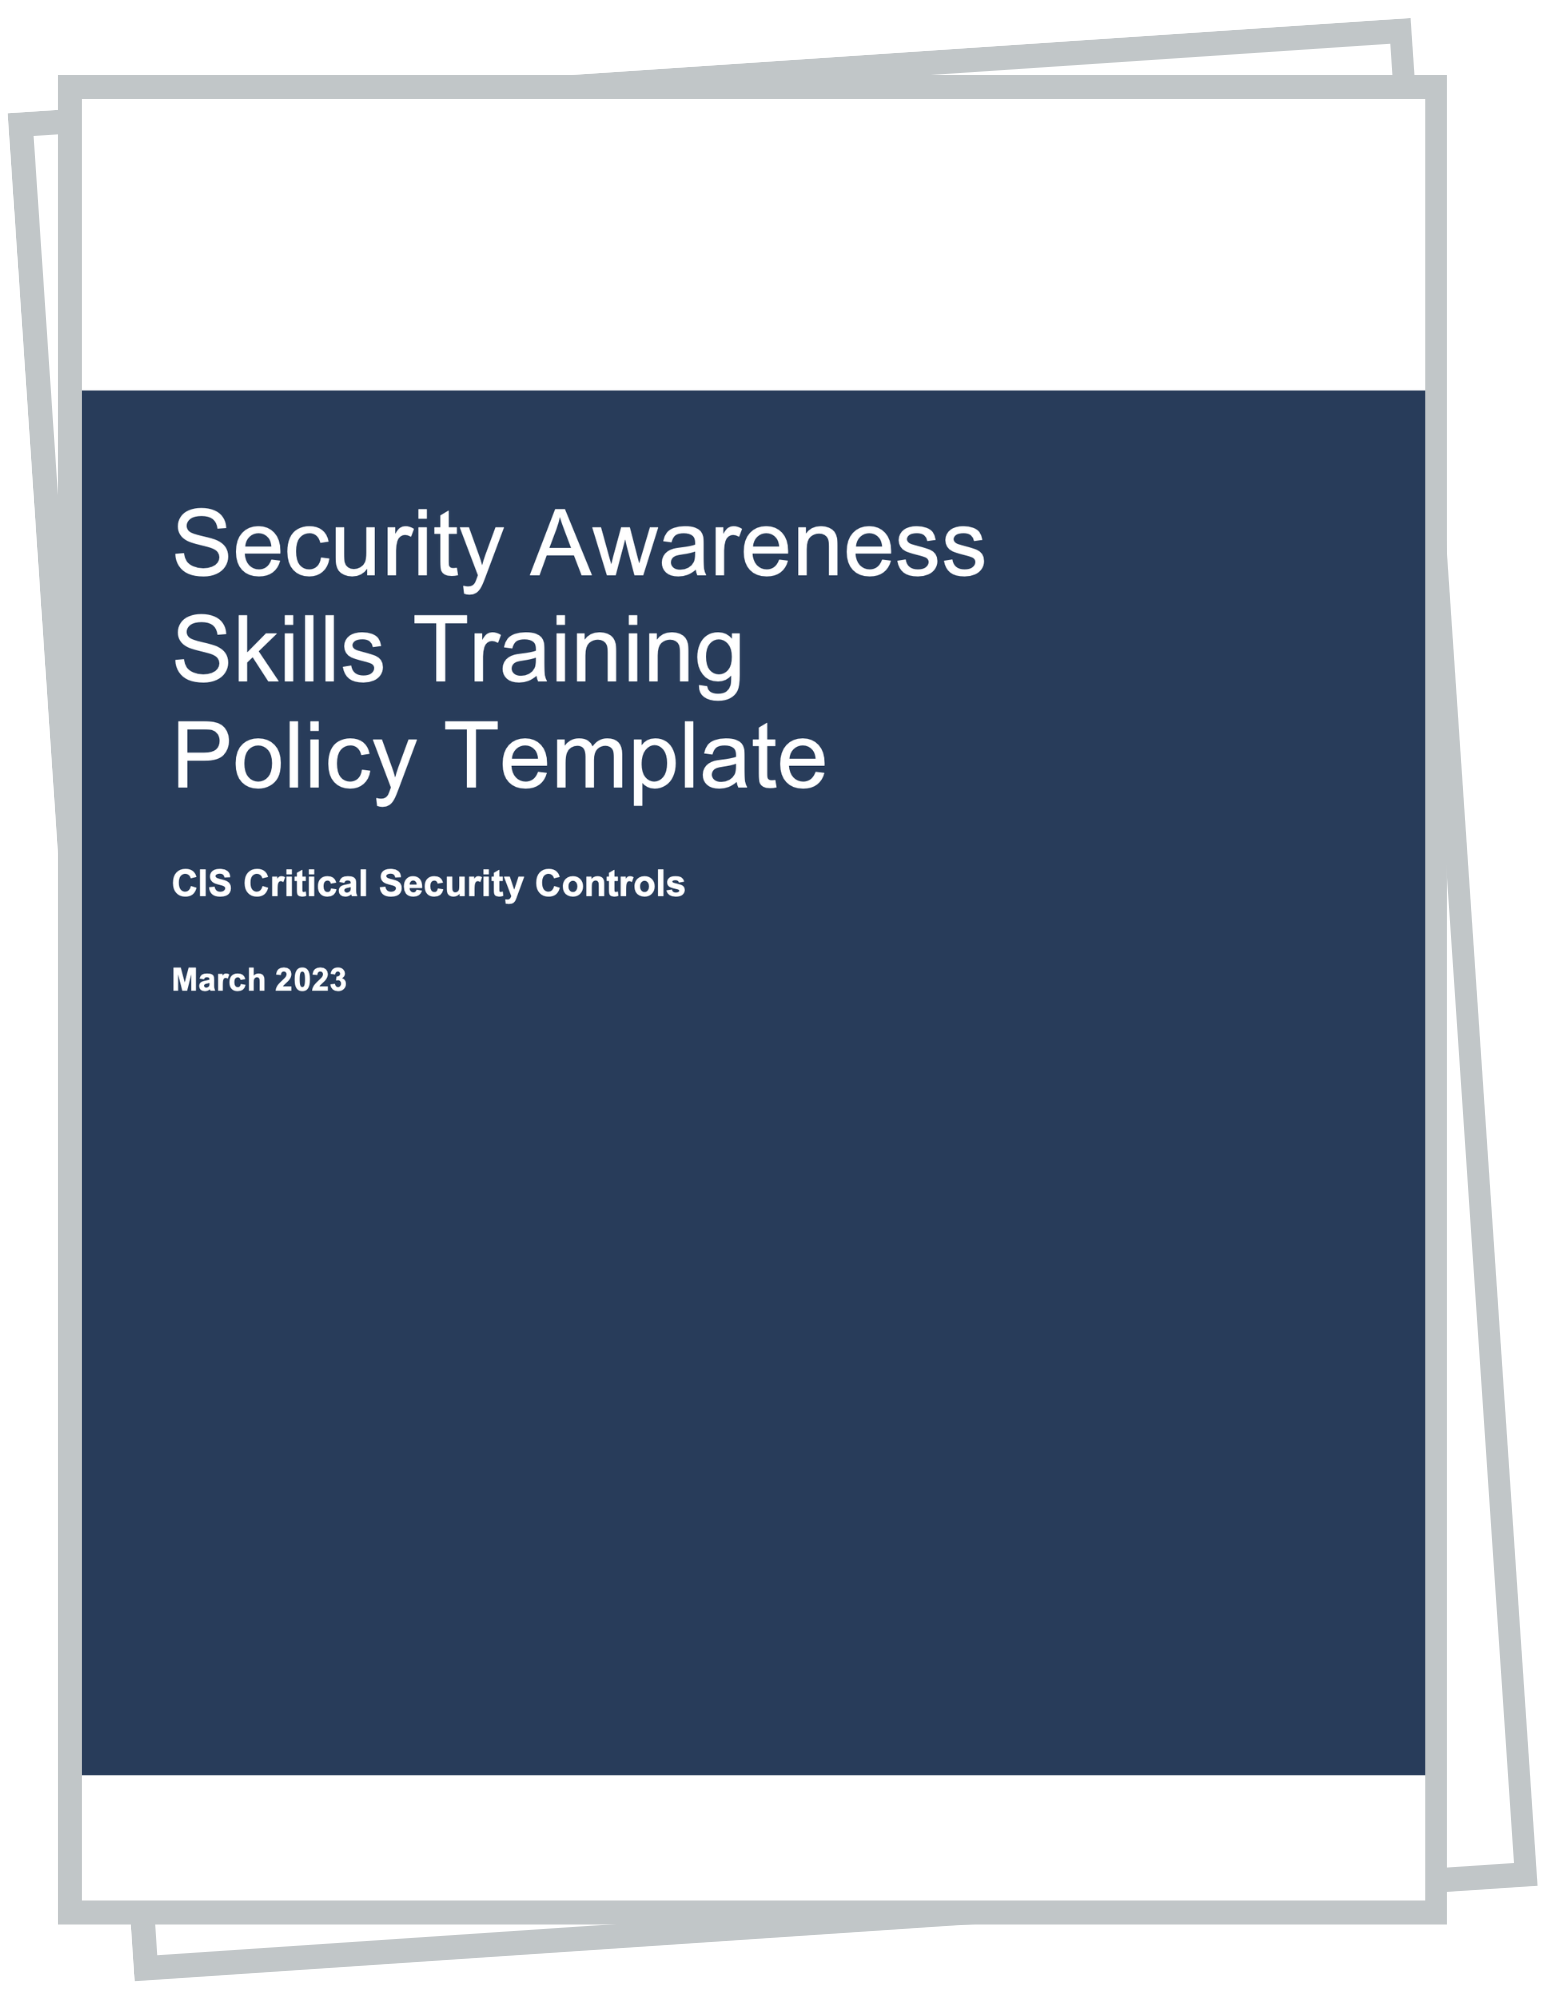 Security Awareness Skills Training Policy Template for CIS Control 14

